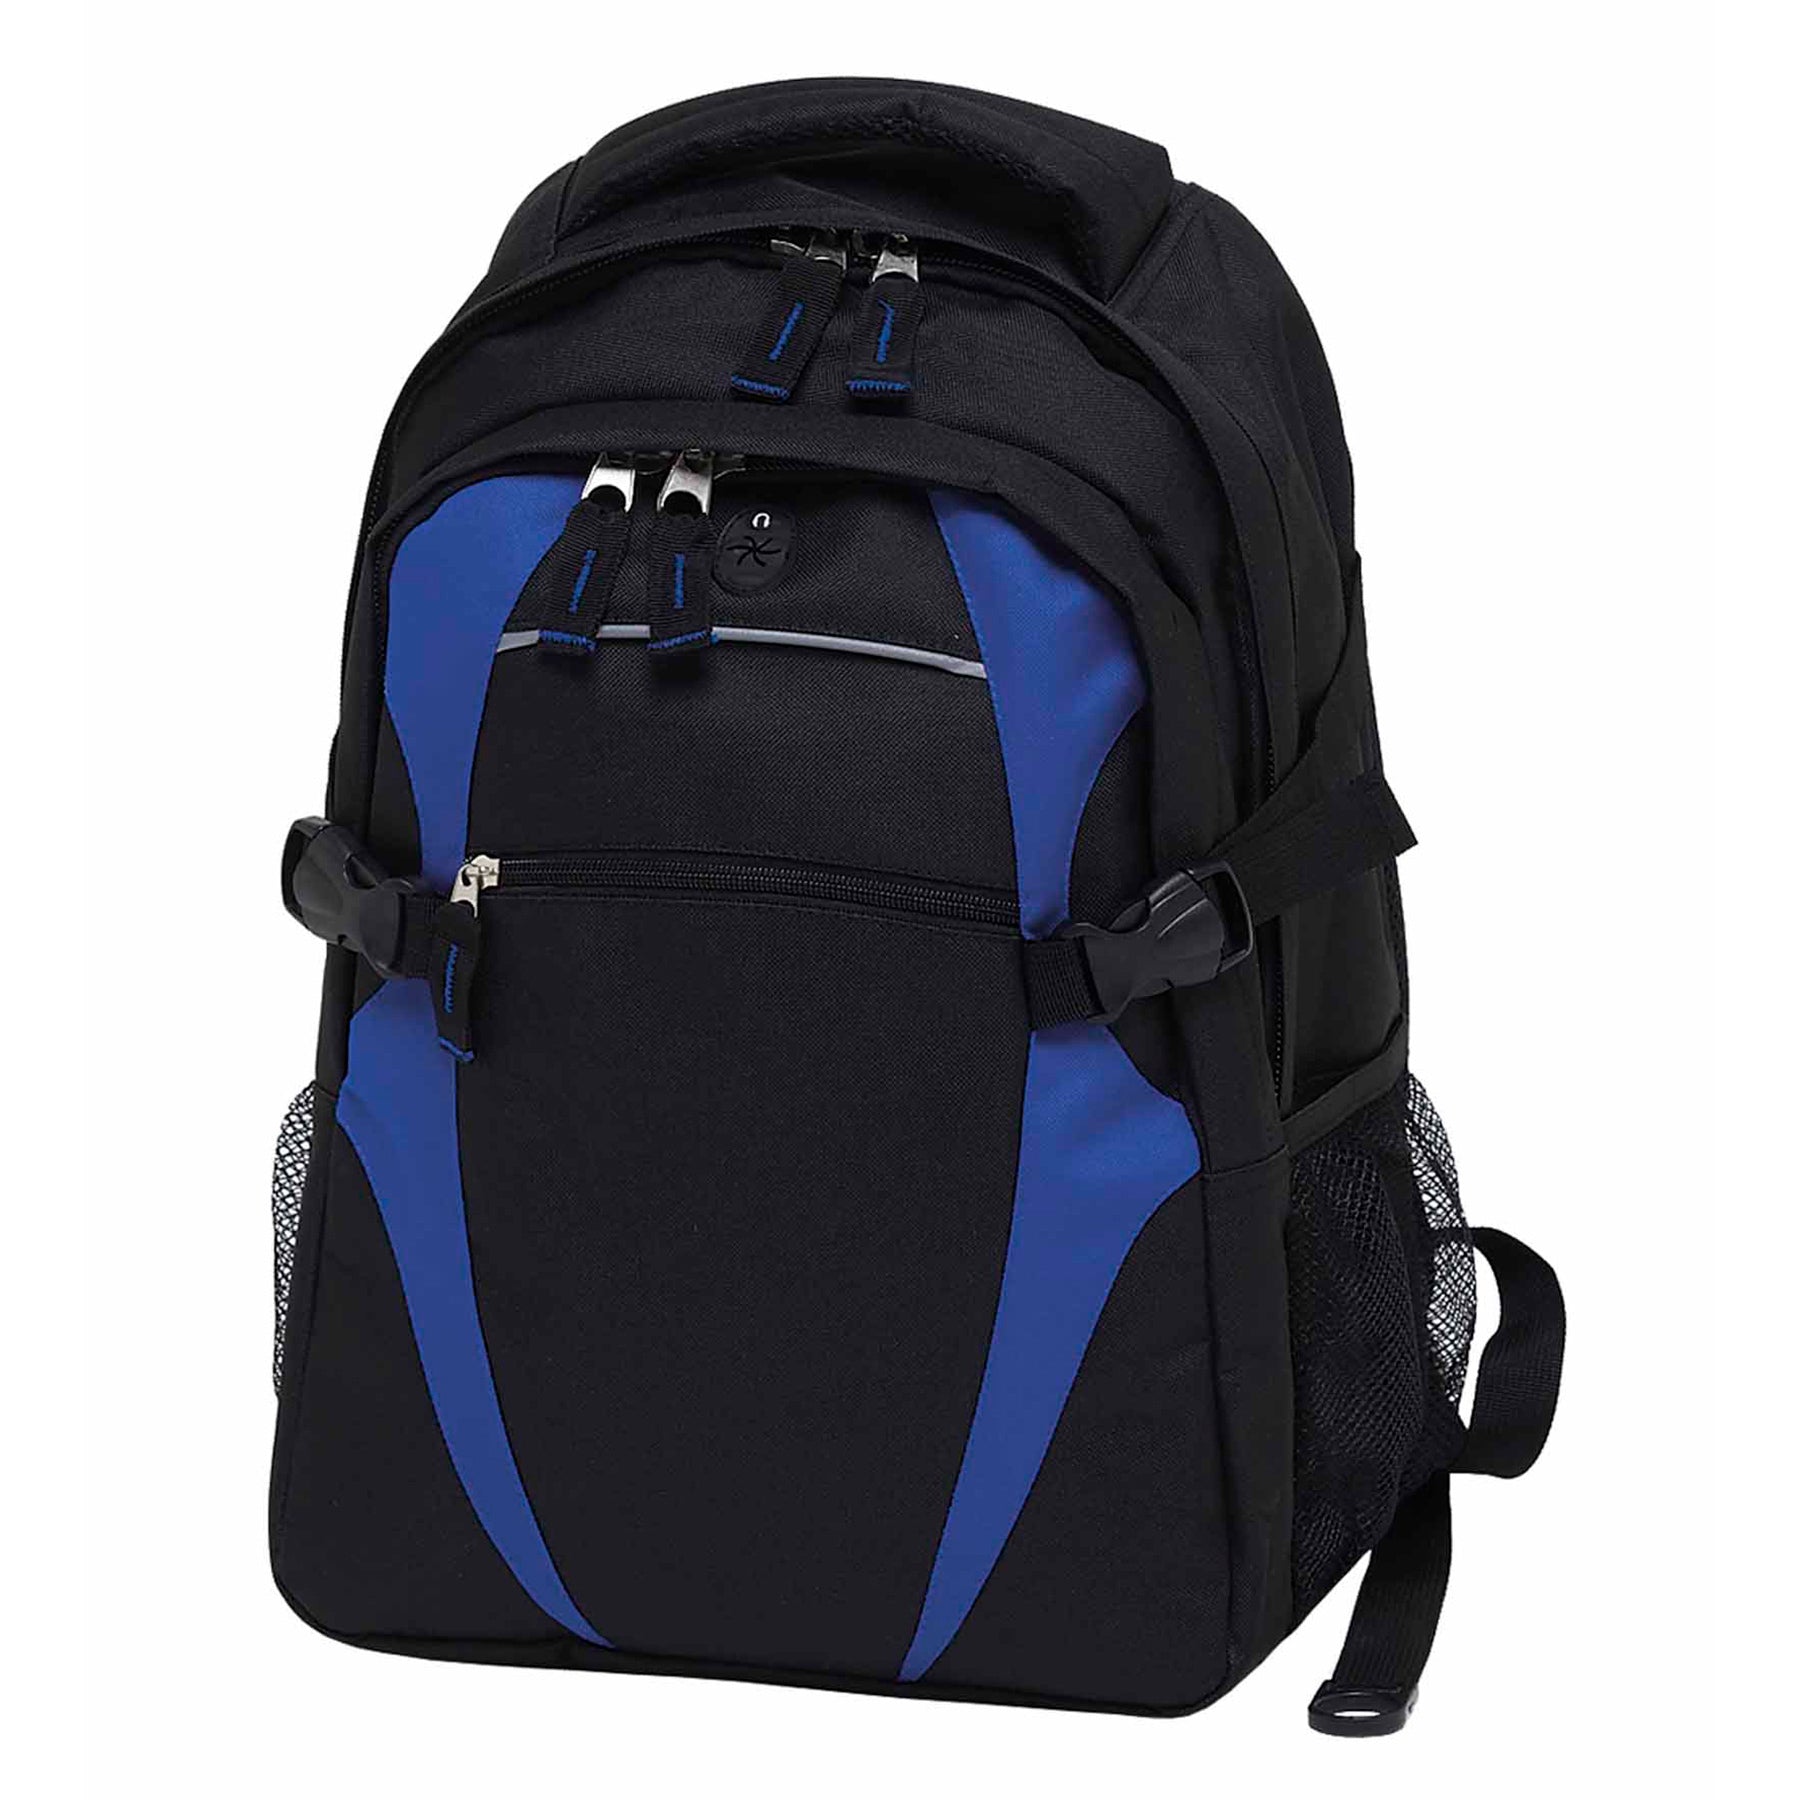 House of Uniforms The Spliced Zenith Backpack Gear for Life Black/Royal